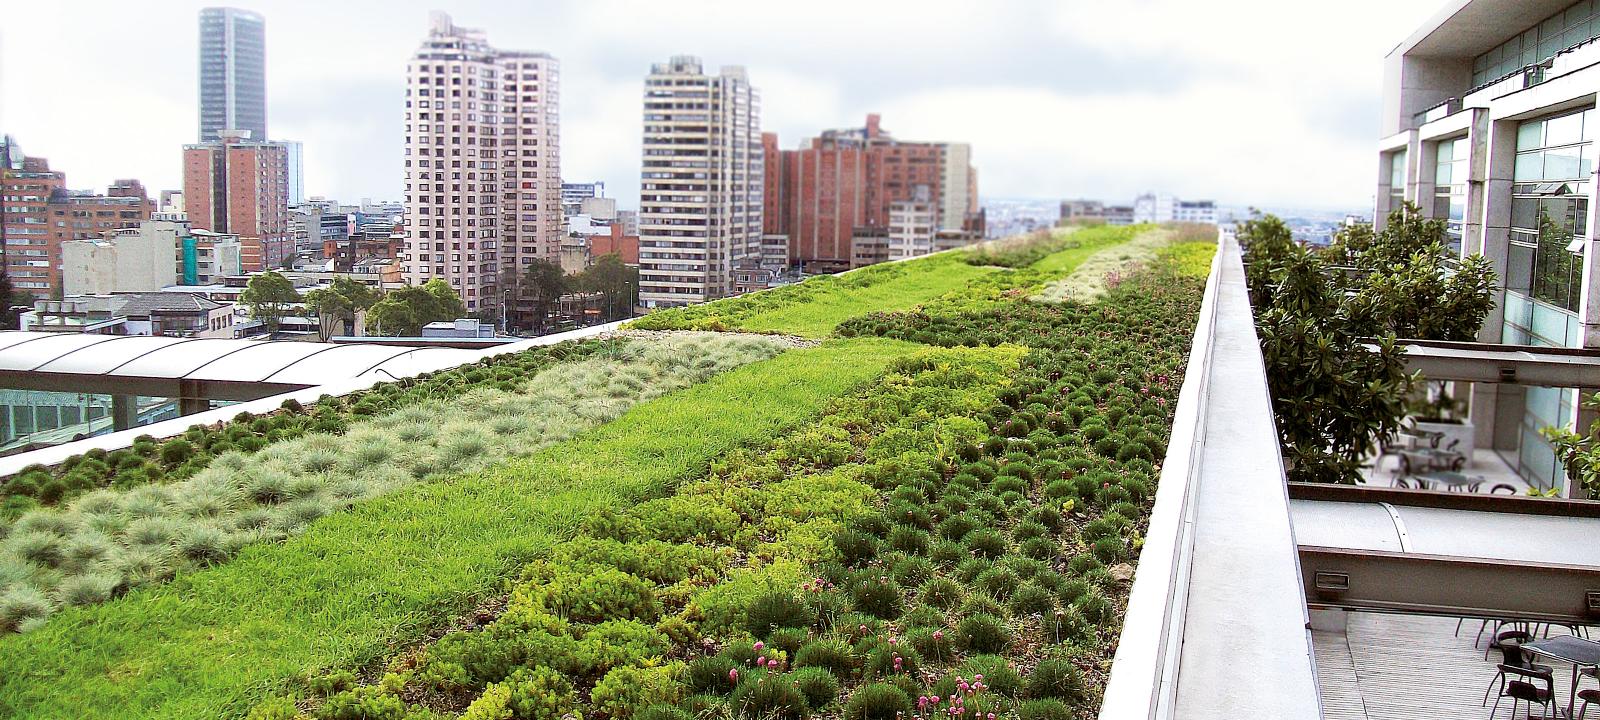 19-extraordinary-facts-about-green-roofs